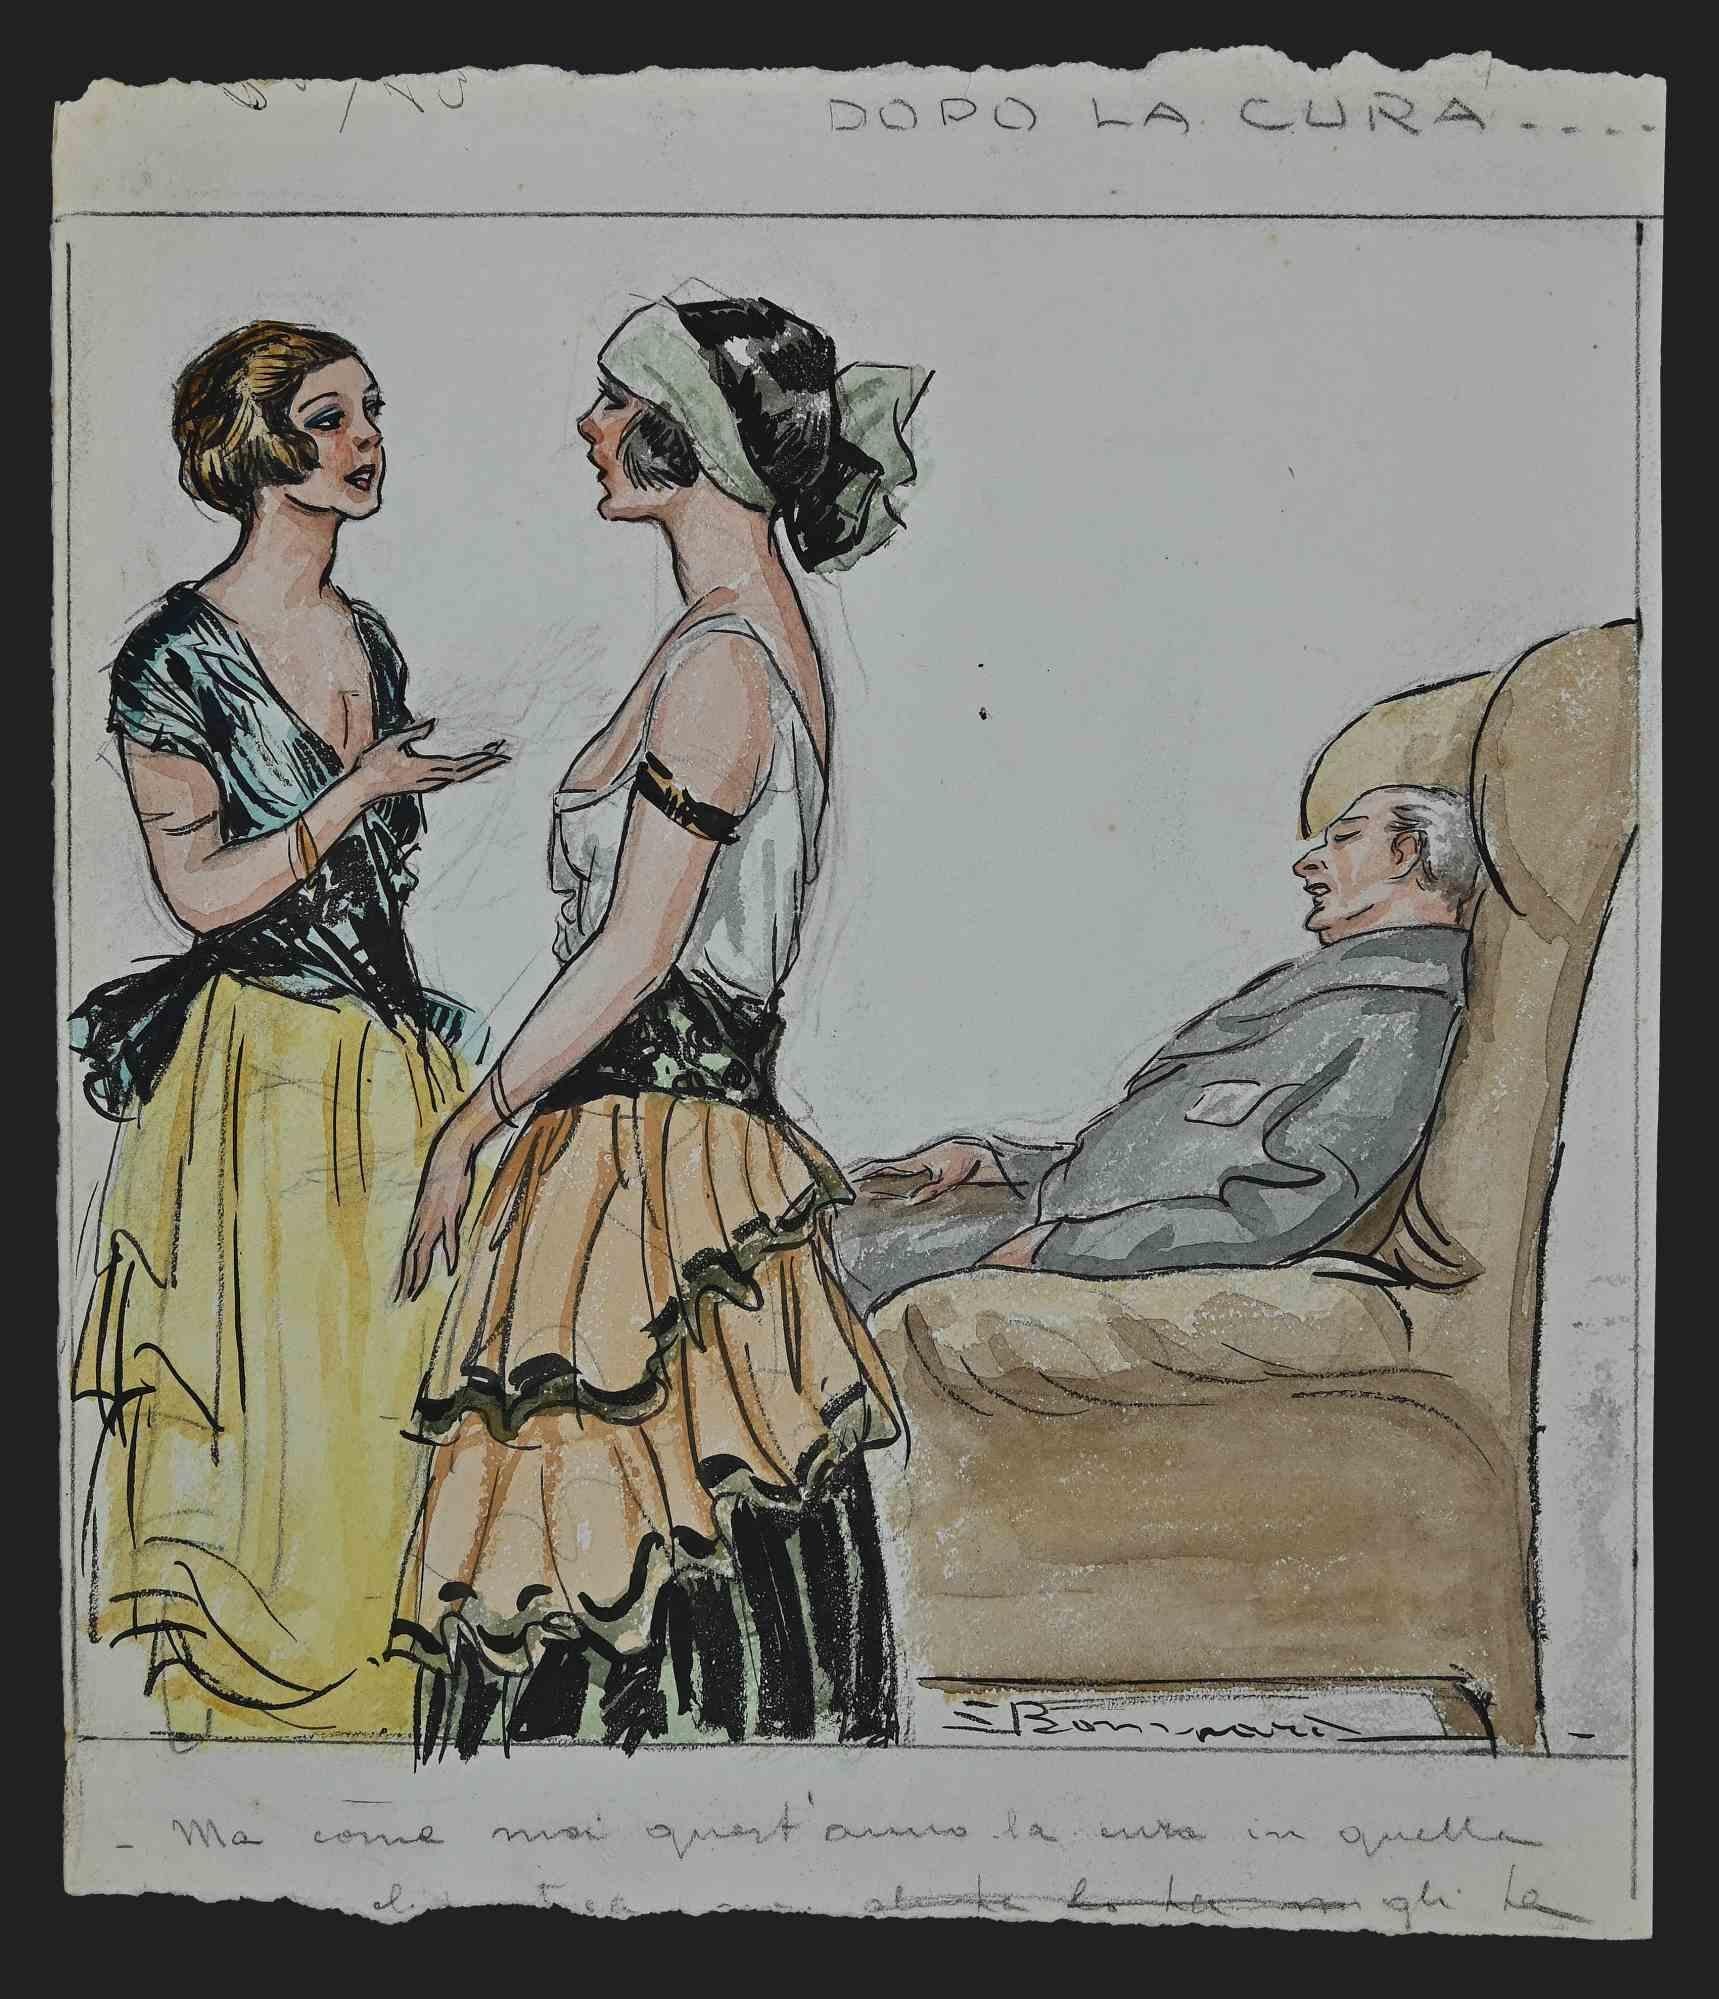 After the Cure - Ink and Watercolor Drawing by Luigi Bompard - 1920s